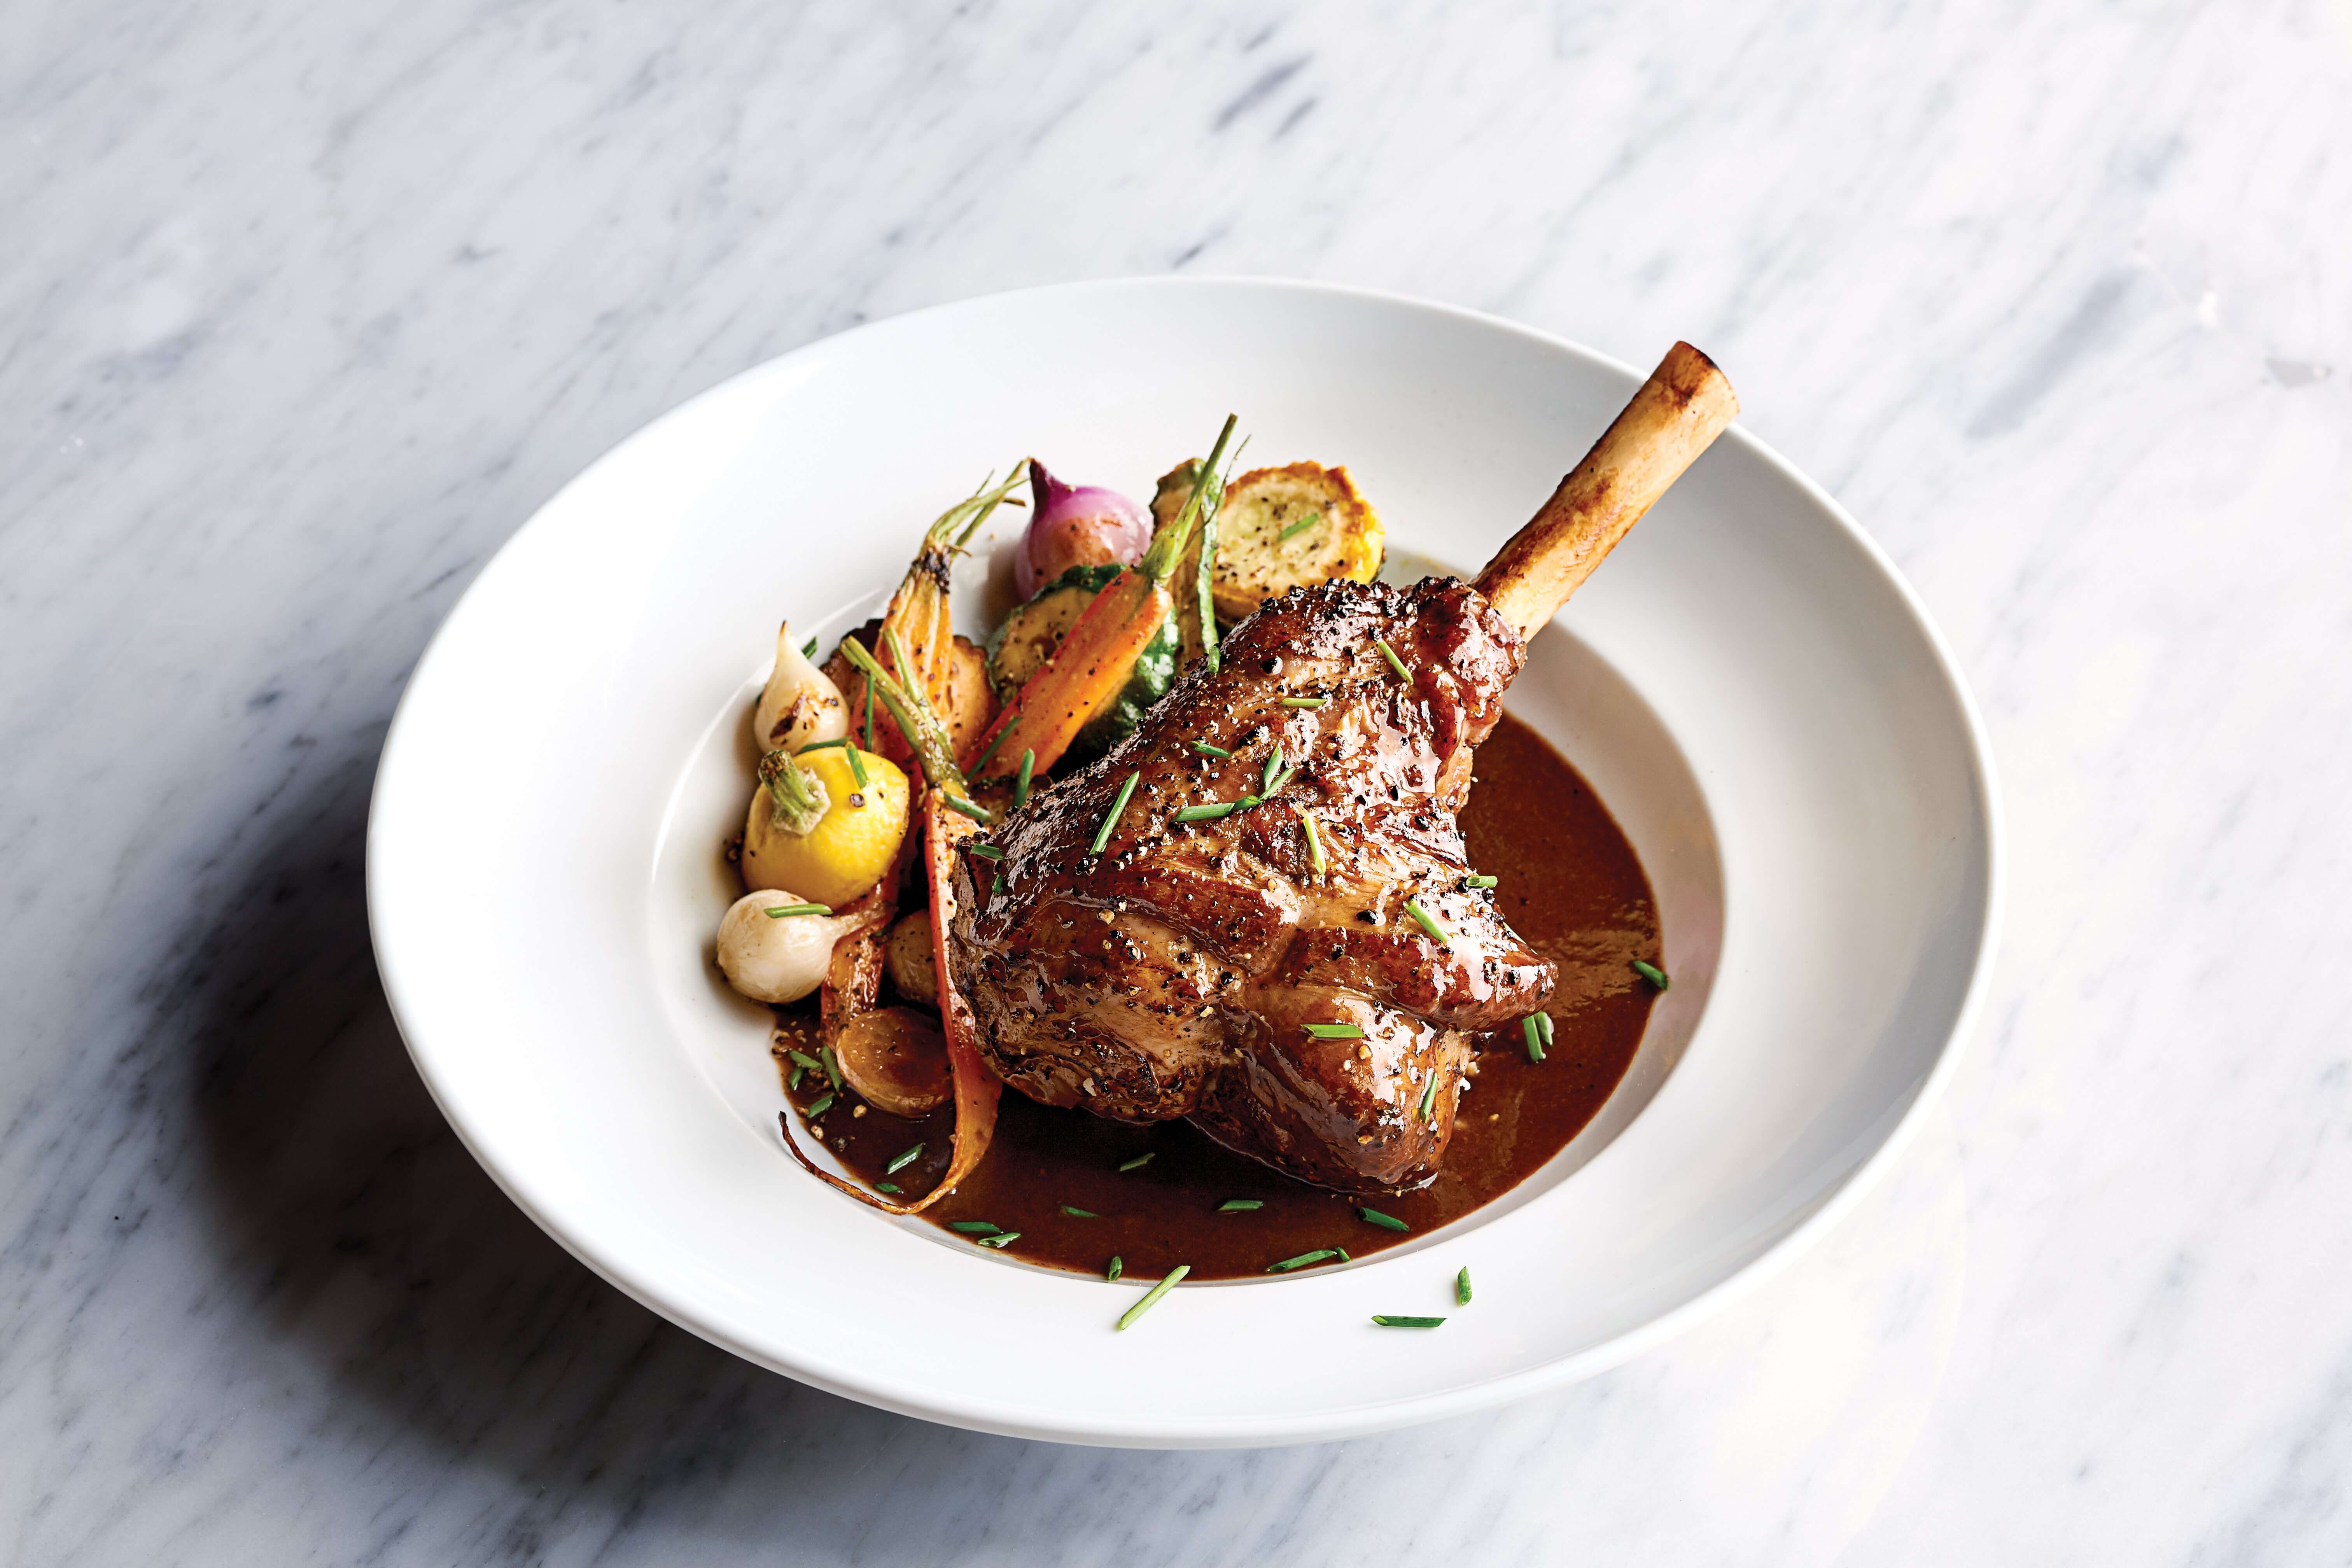 Pasture-raised lamb shank with marble potatoes, baby vegetables, and lamb reduction